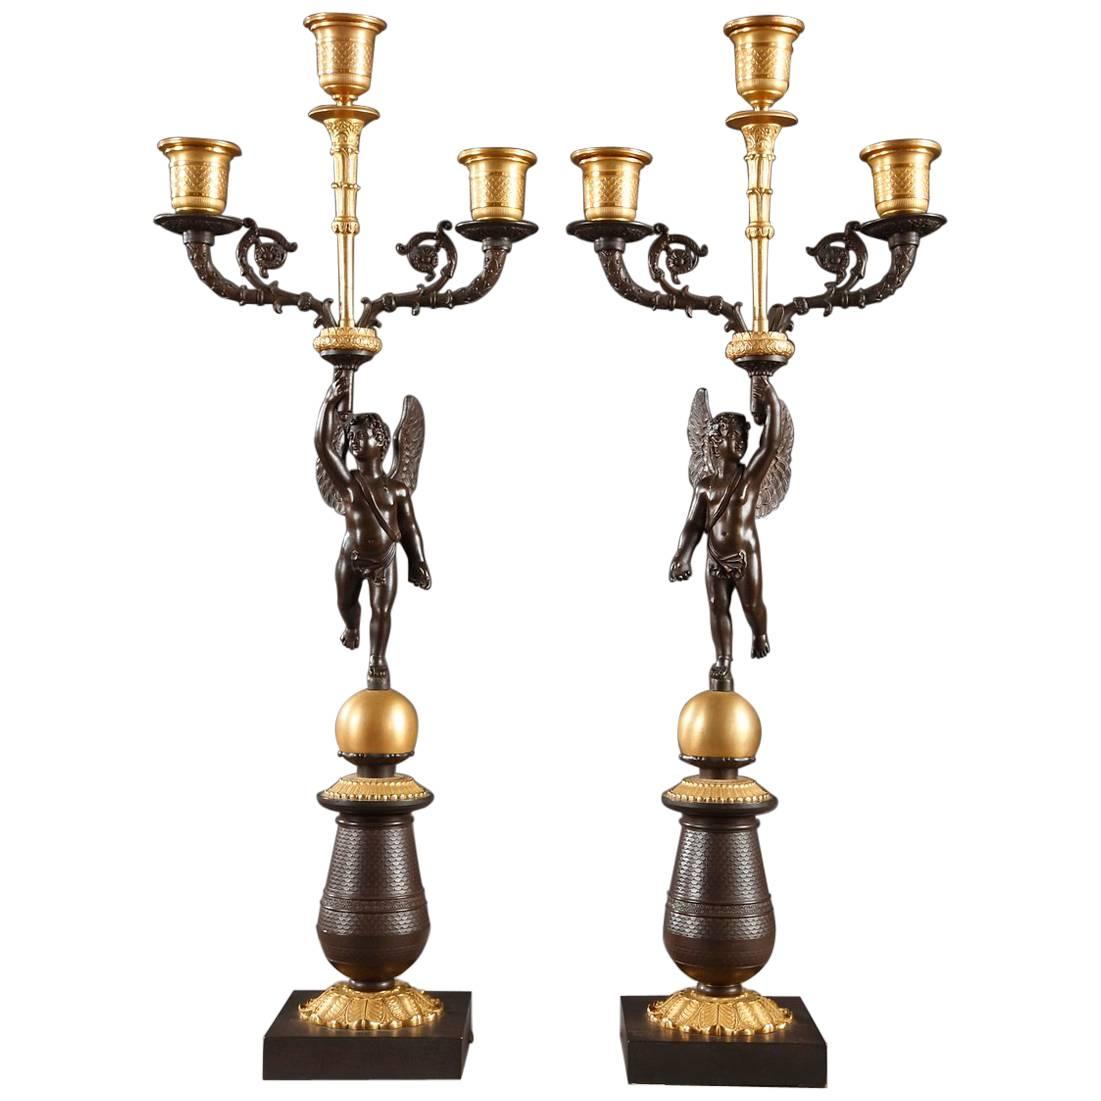 Pair of Early 19th Century Candelabras in Gilded and Patinated Bronze